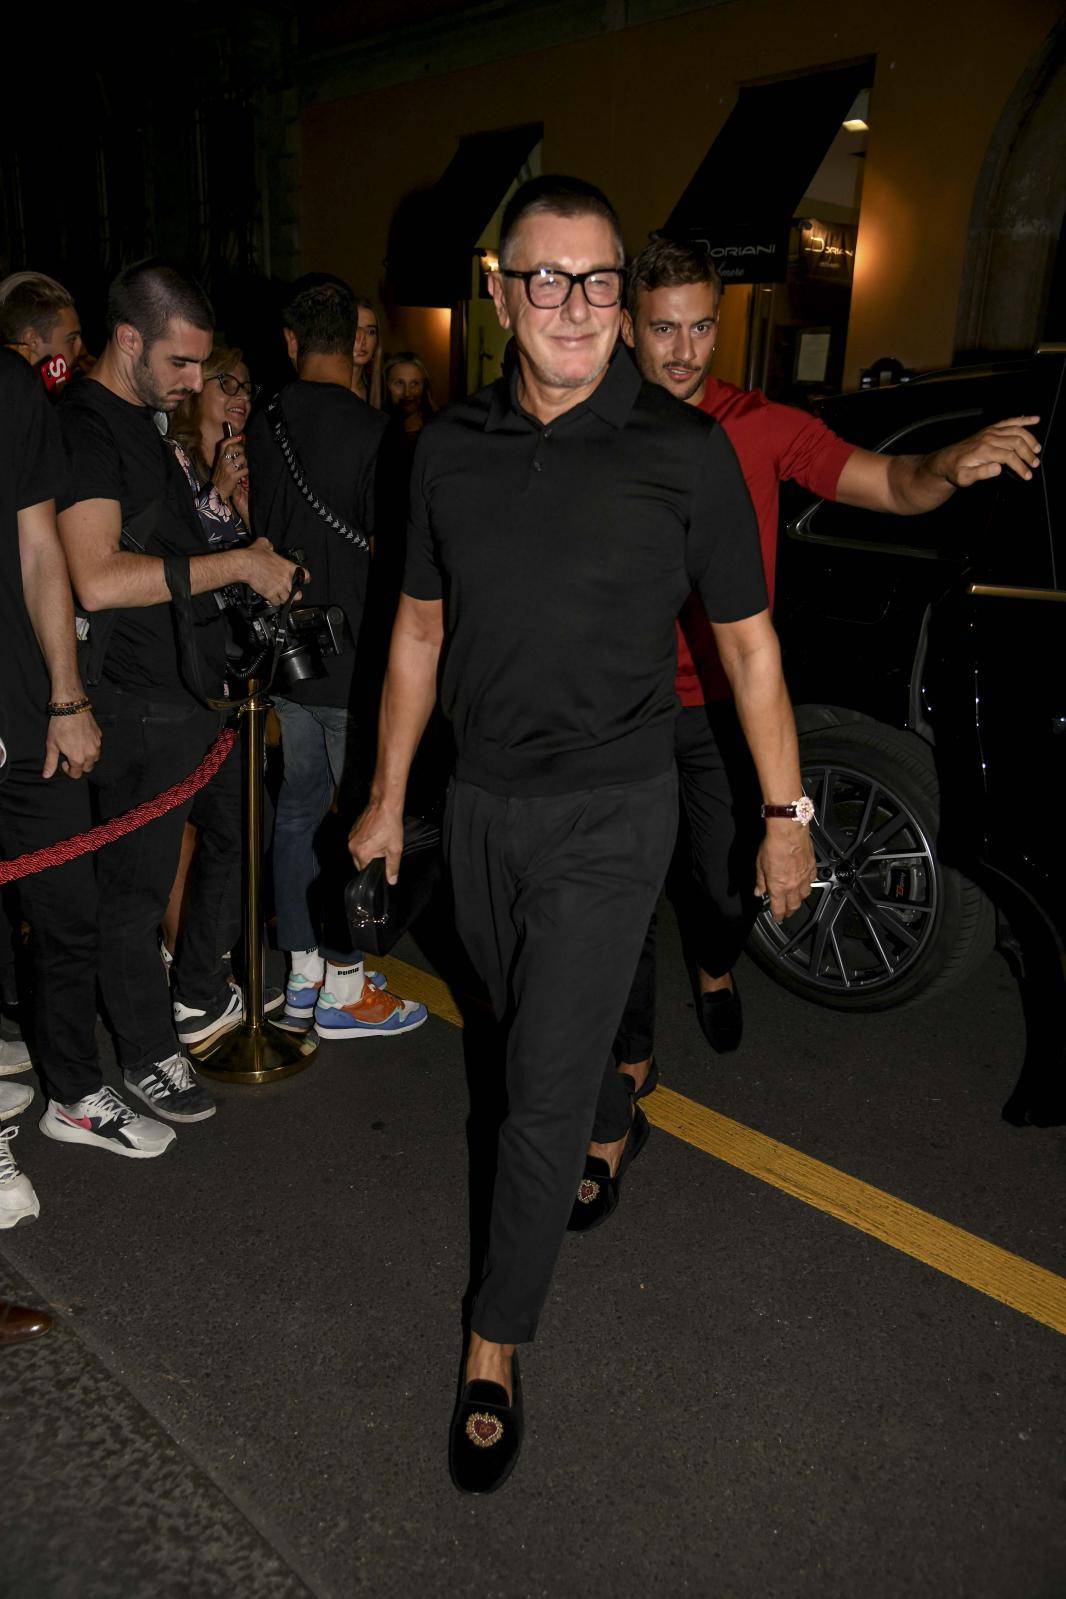 Milan. Arrivals at Domenico Dolce's birthday party